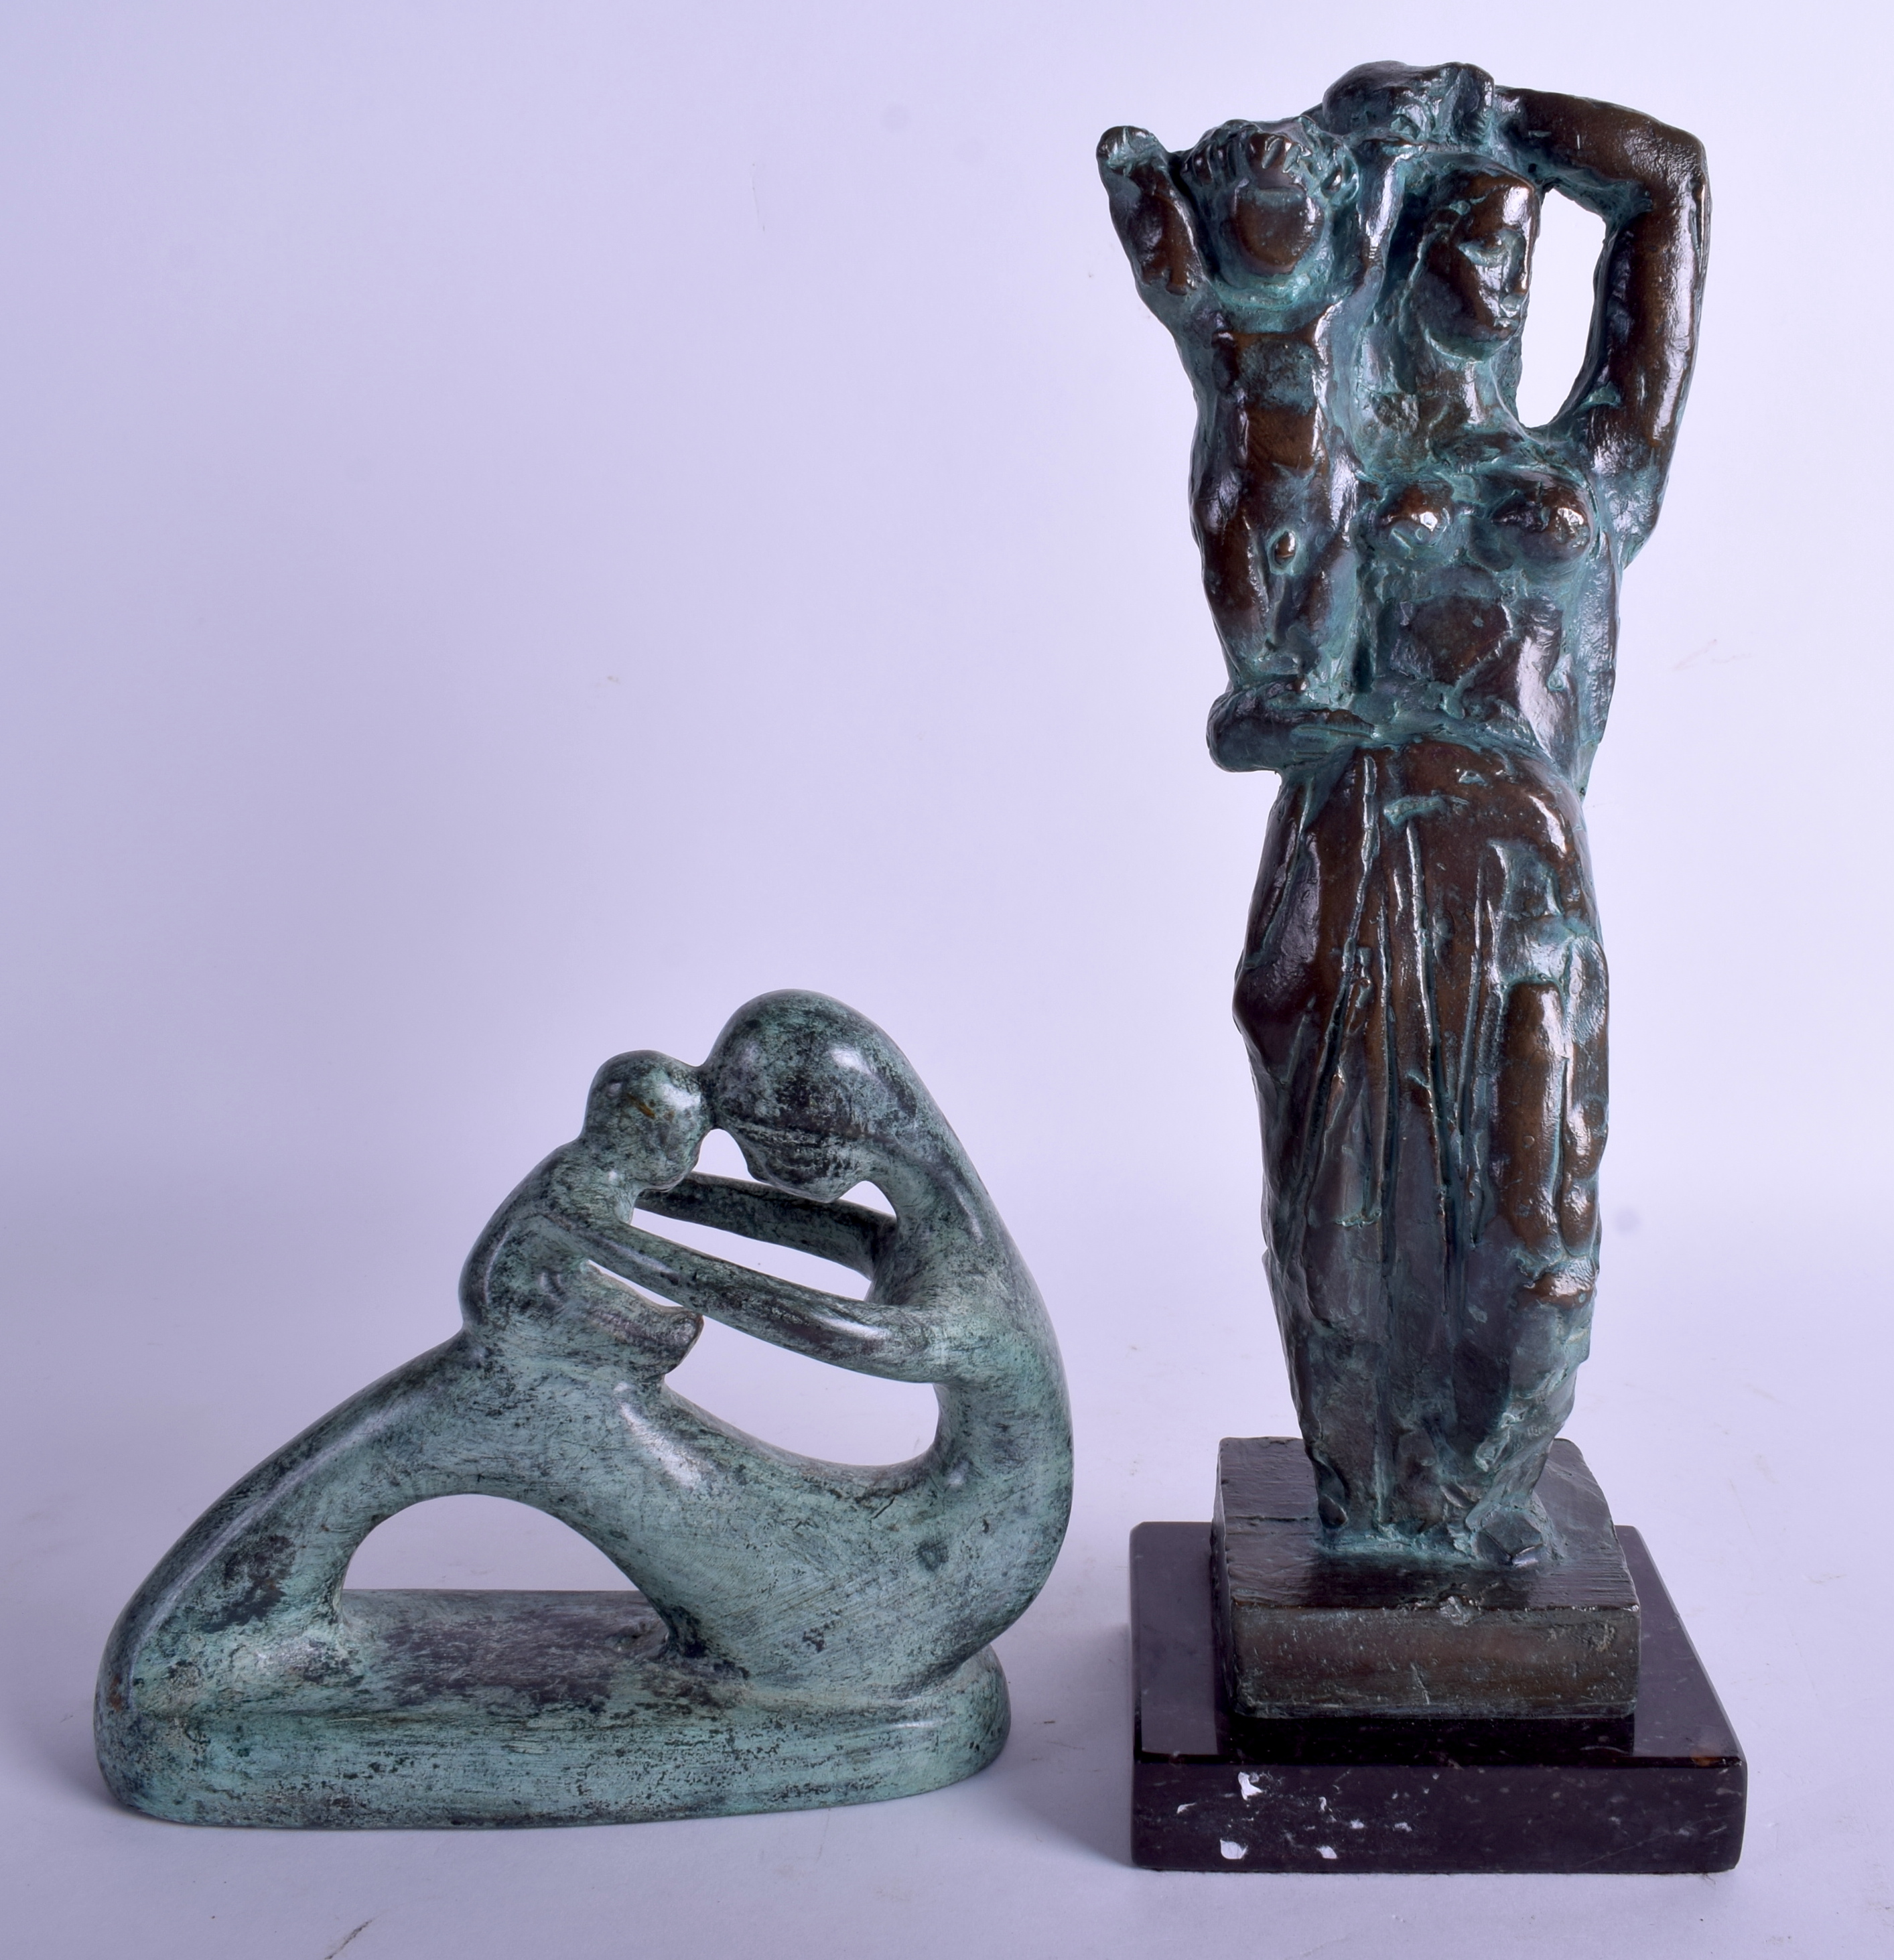 A RUSSIAN SOVIET BRONZE SCULPTURE OF A MOTHER AND CHILD by Vladimir Efimovich Tsigal (1917-2013) to